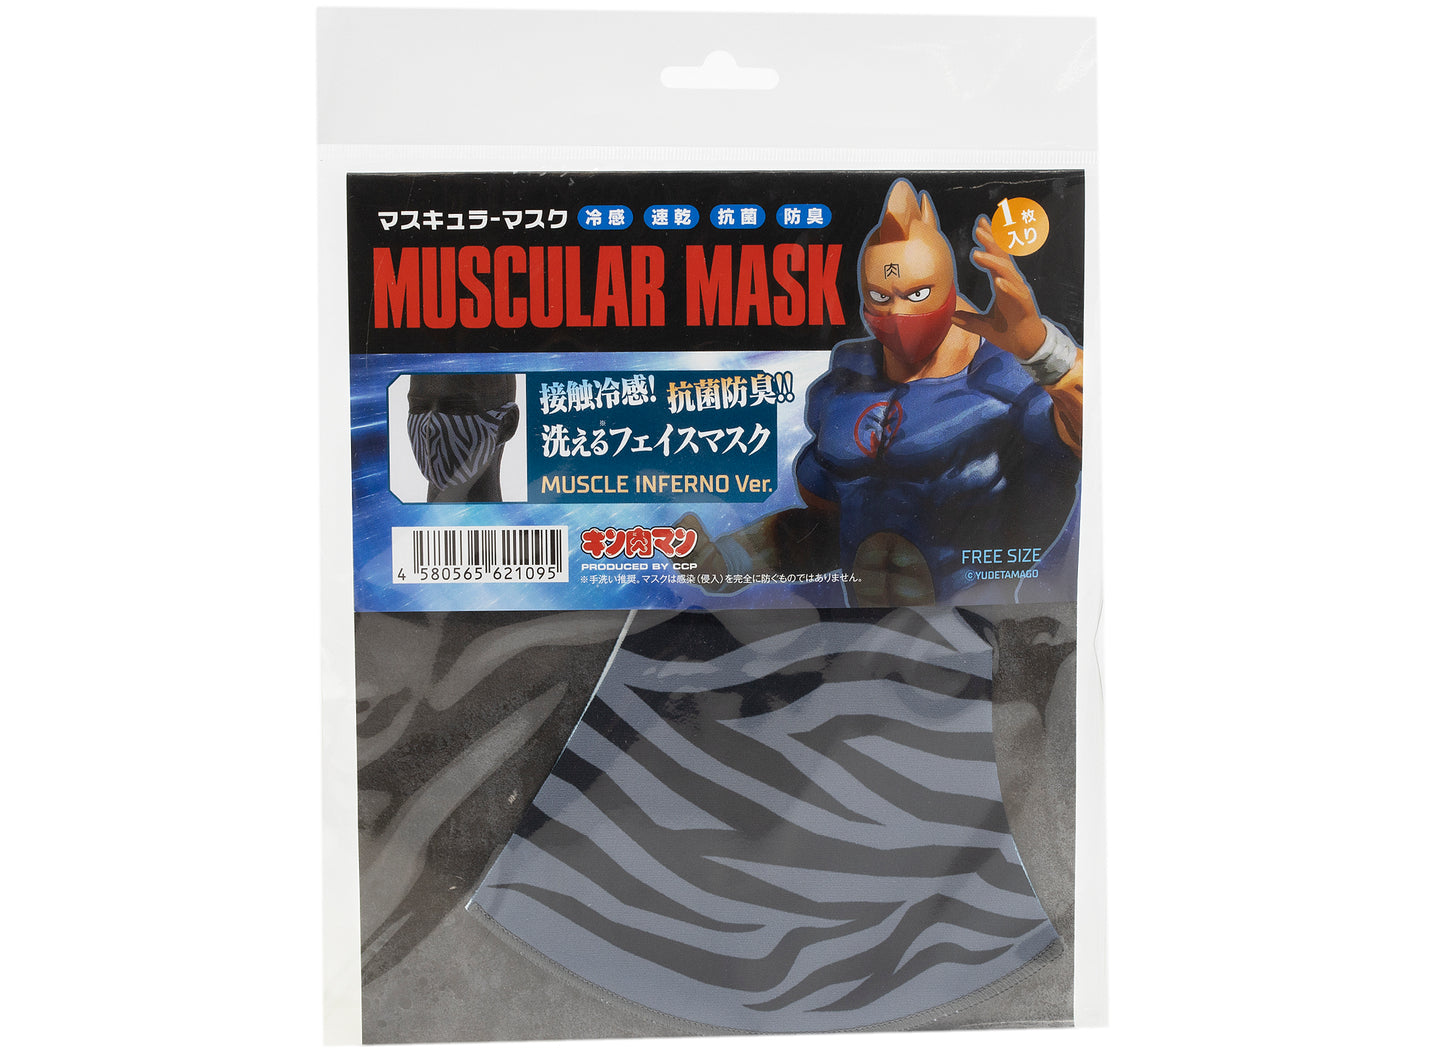 Medicom Toy Muscle Inferno Face Mask